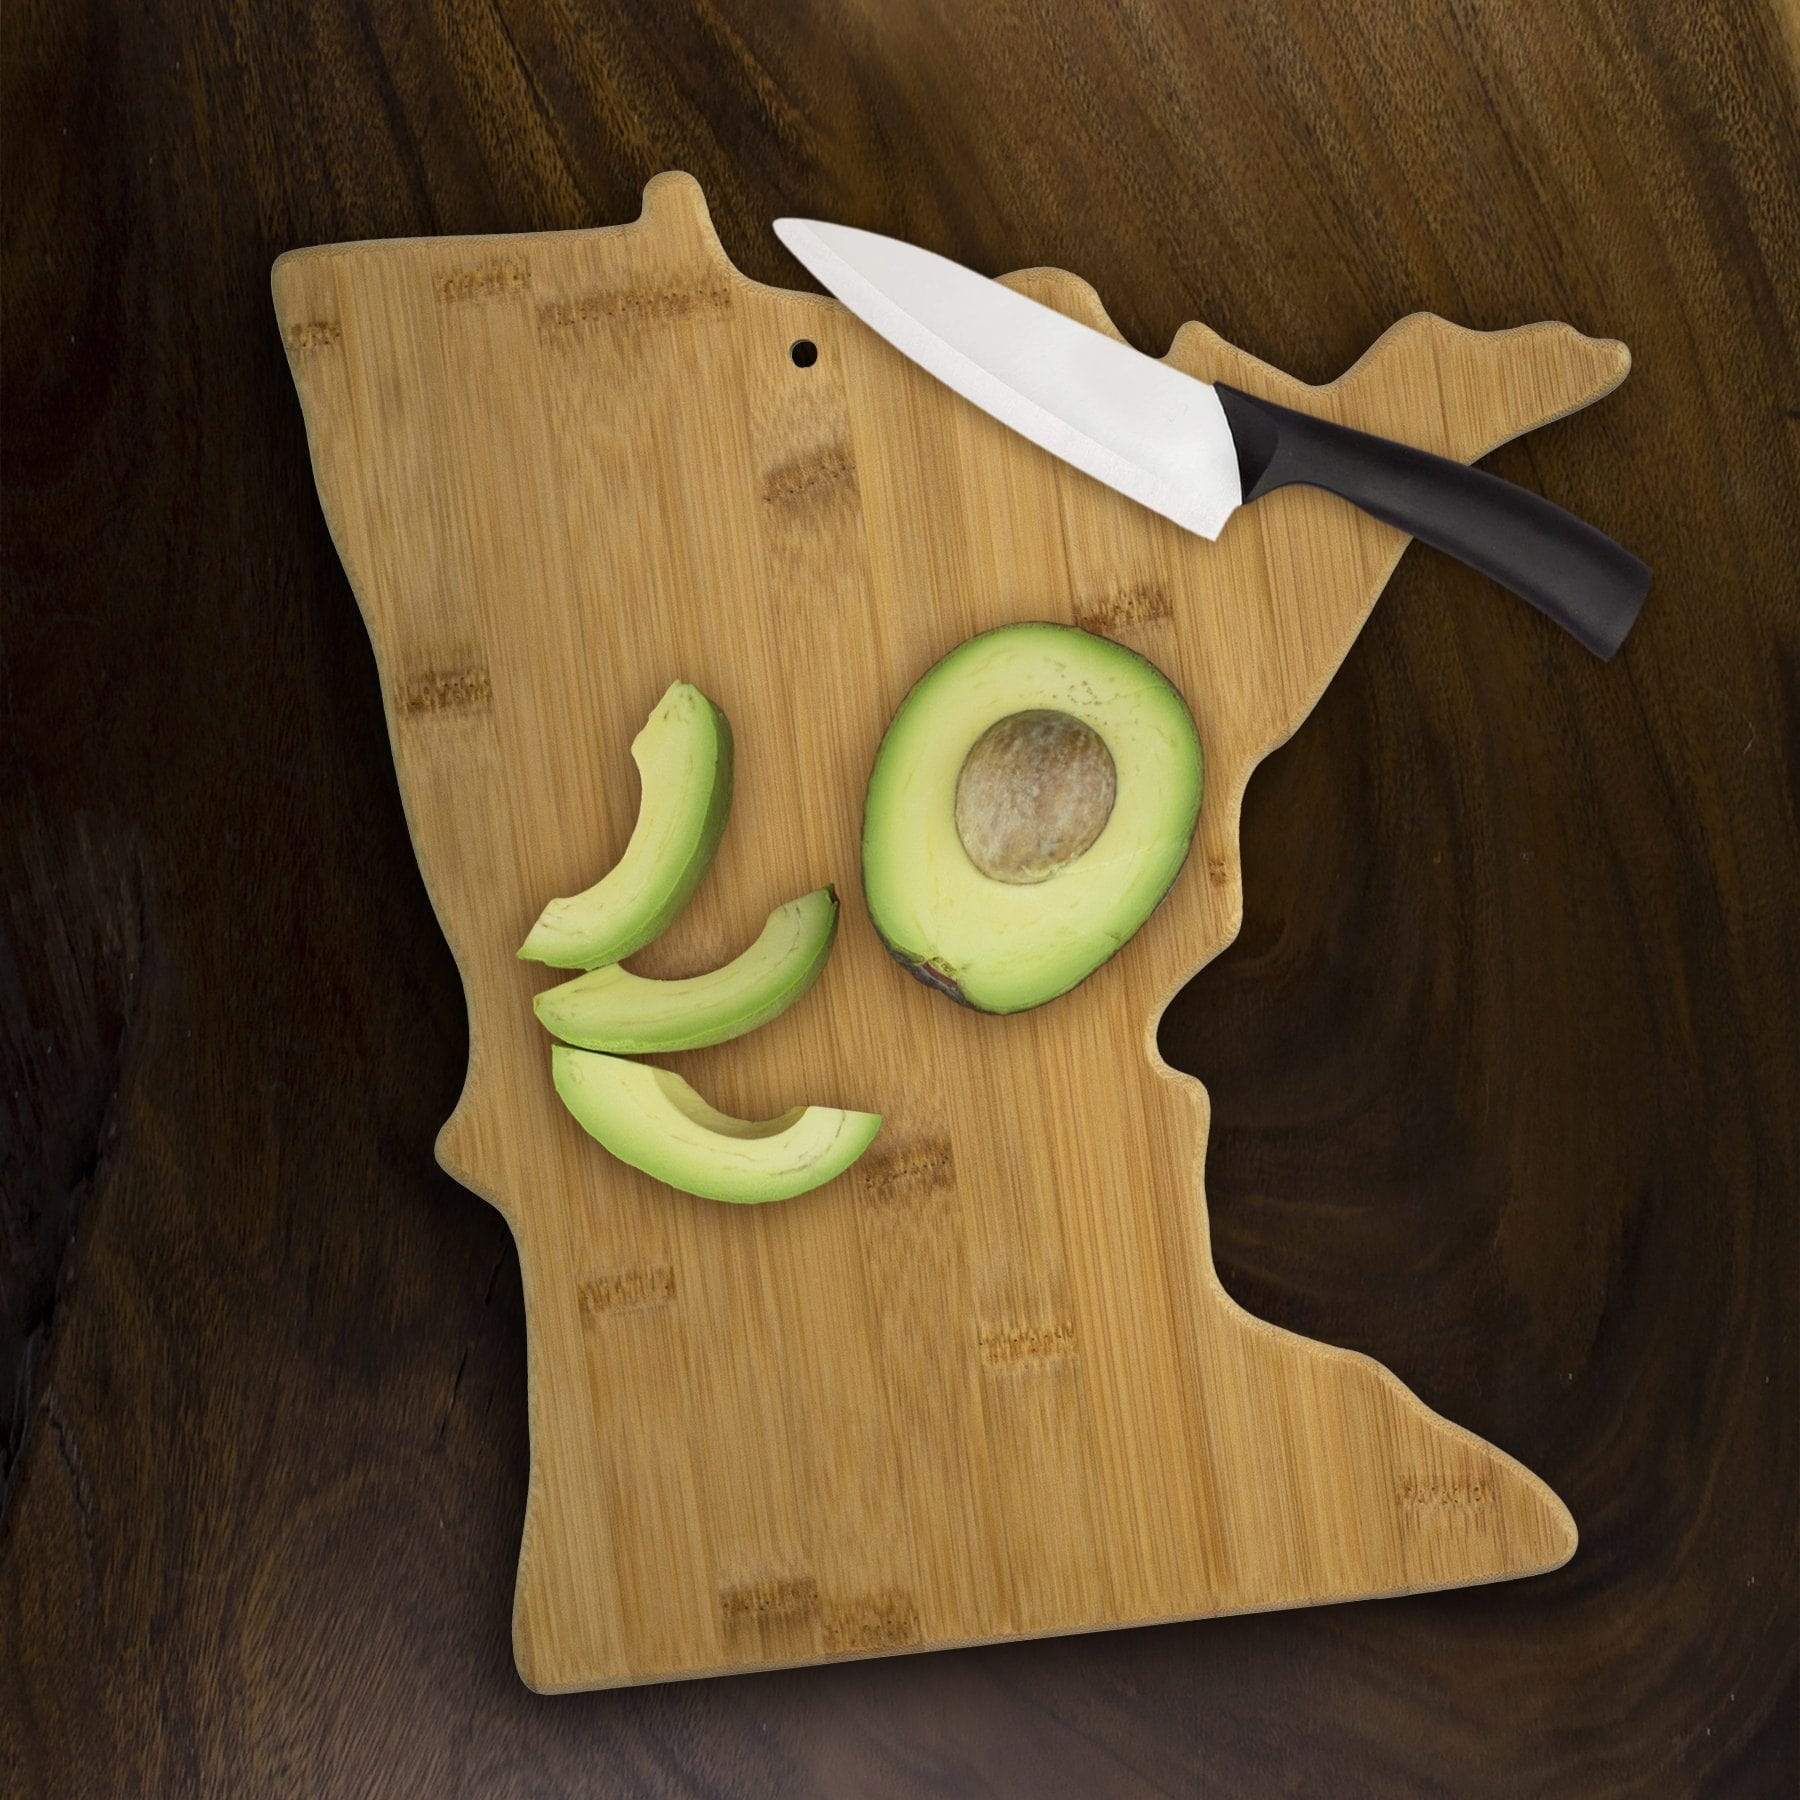 Totally Bamboo Minnesota State Shaped Bamboo Serving and Cutting Board